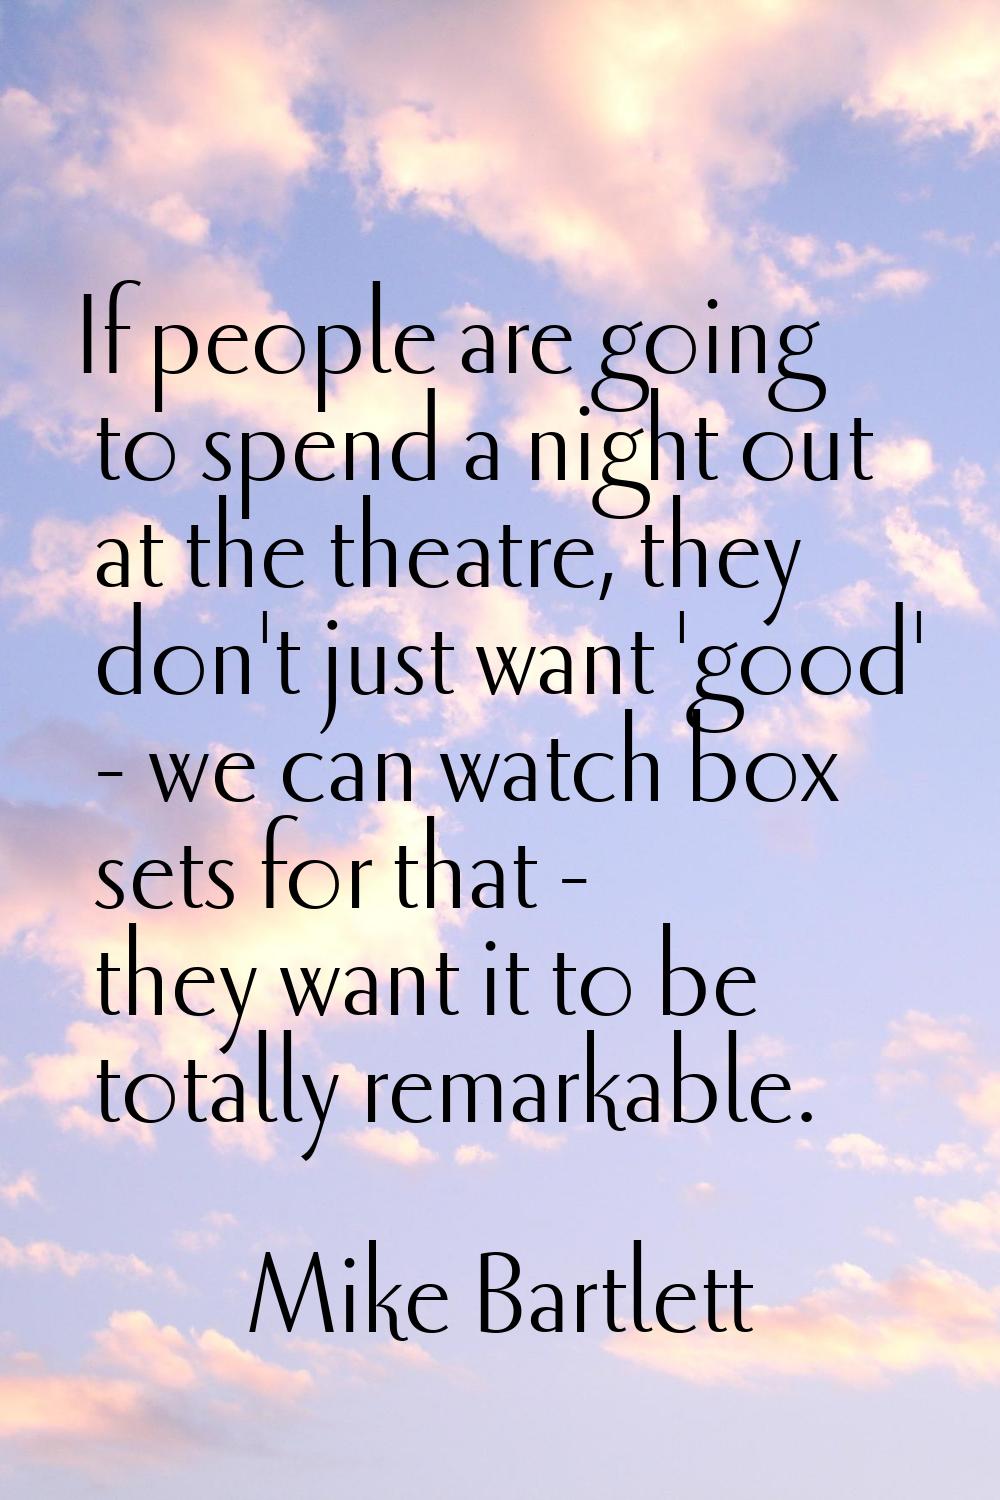 If people are going to spend a night out at the theatre, they don't just want 'good' - we can watch